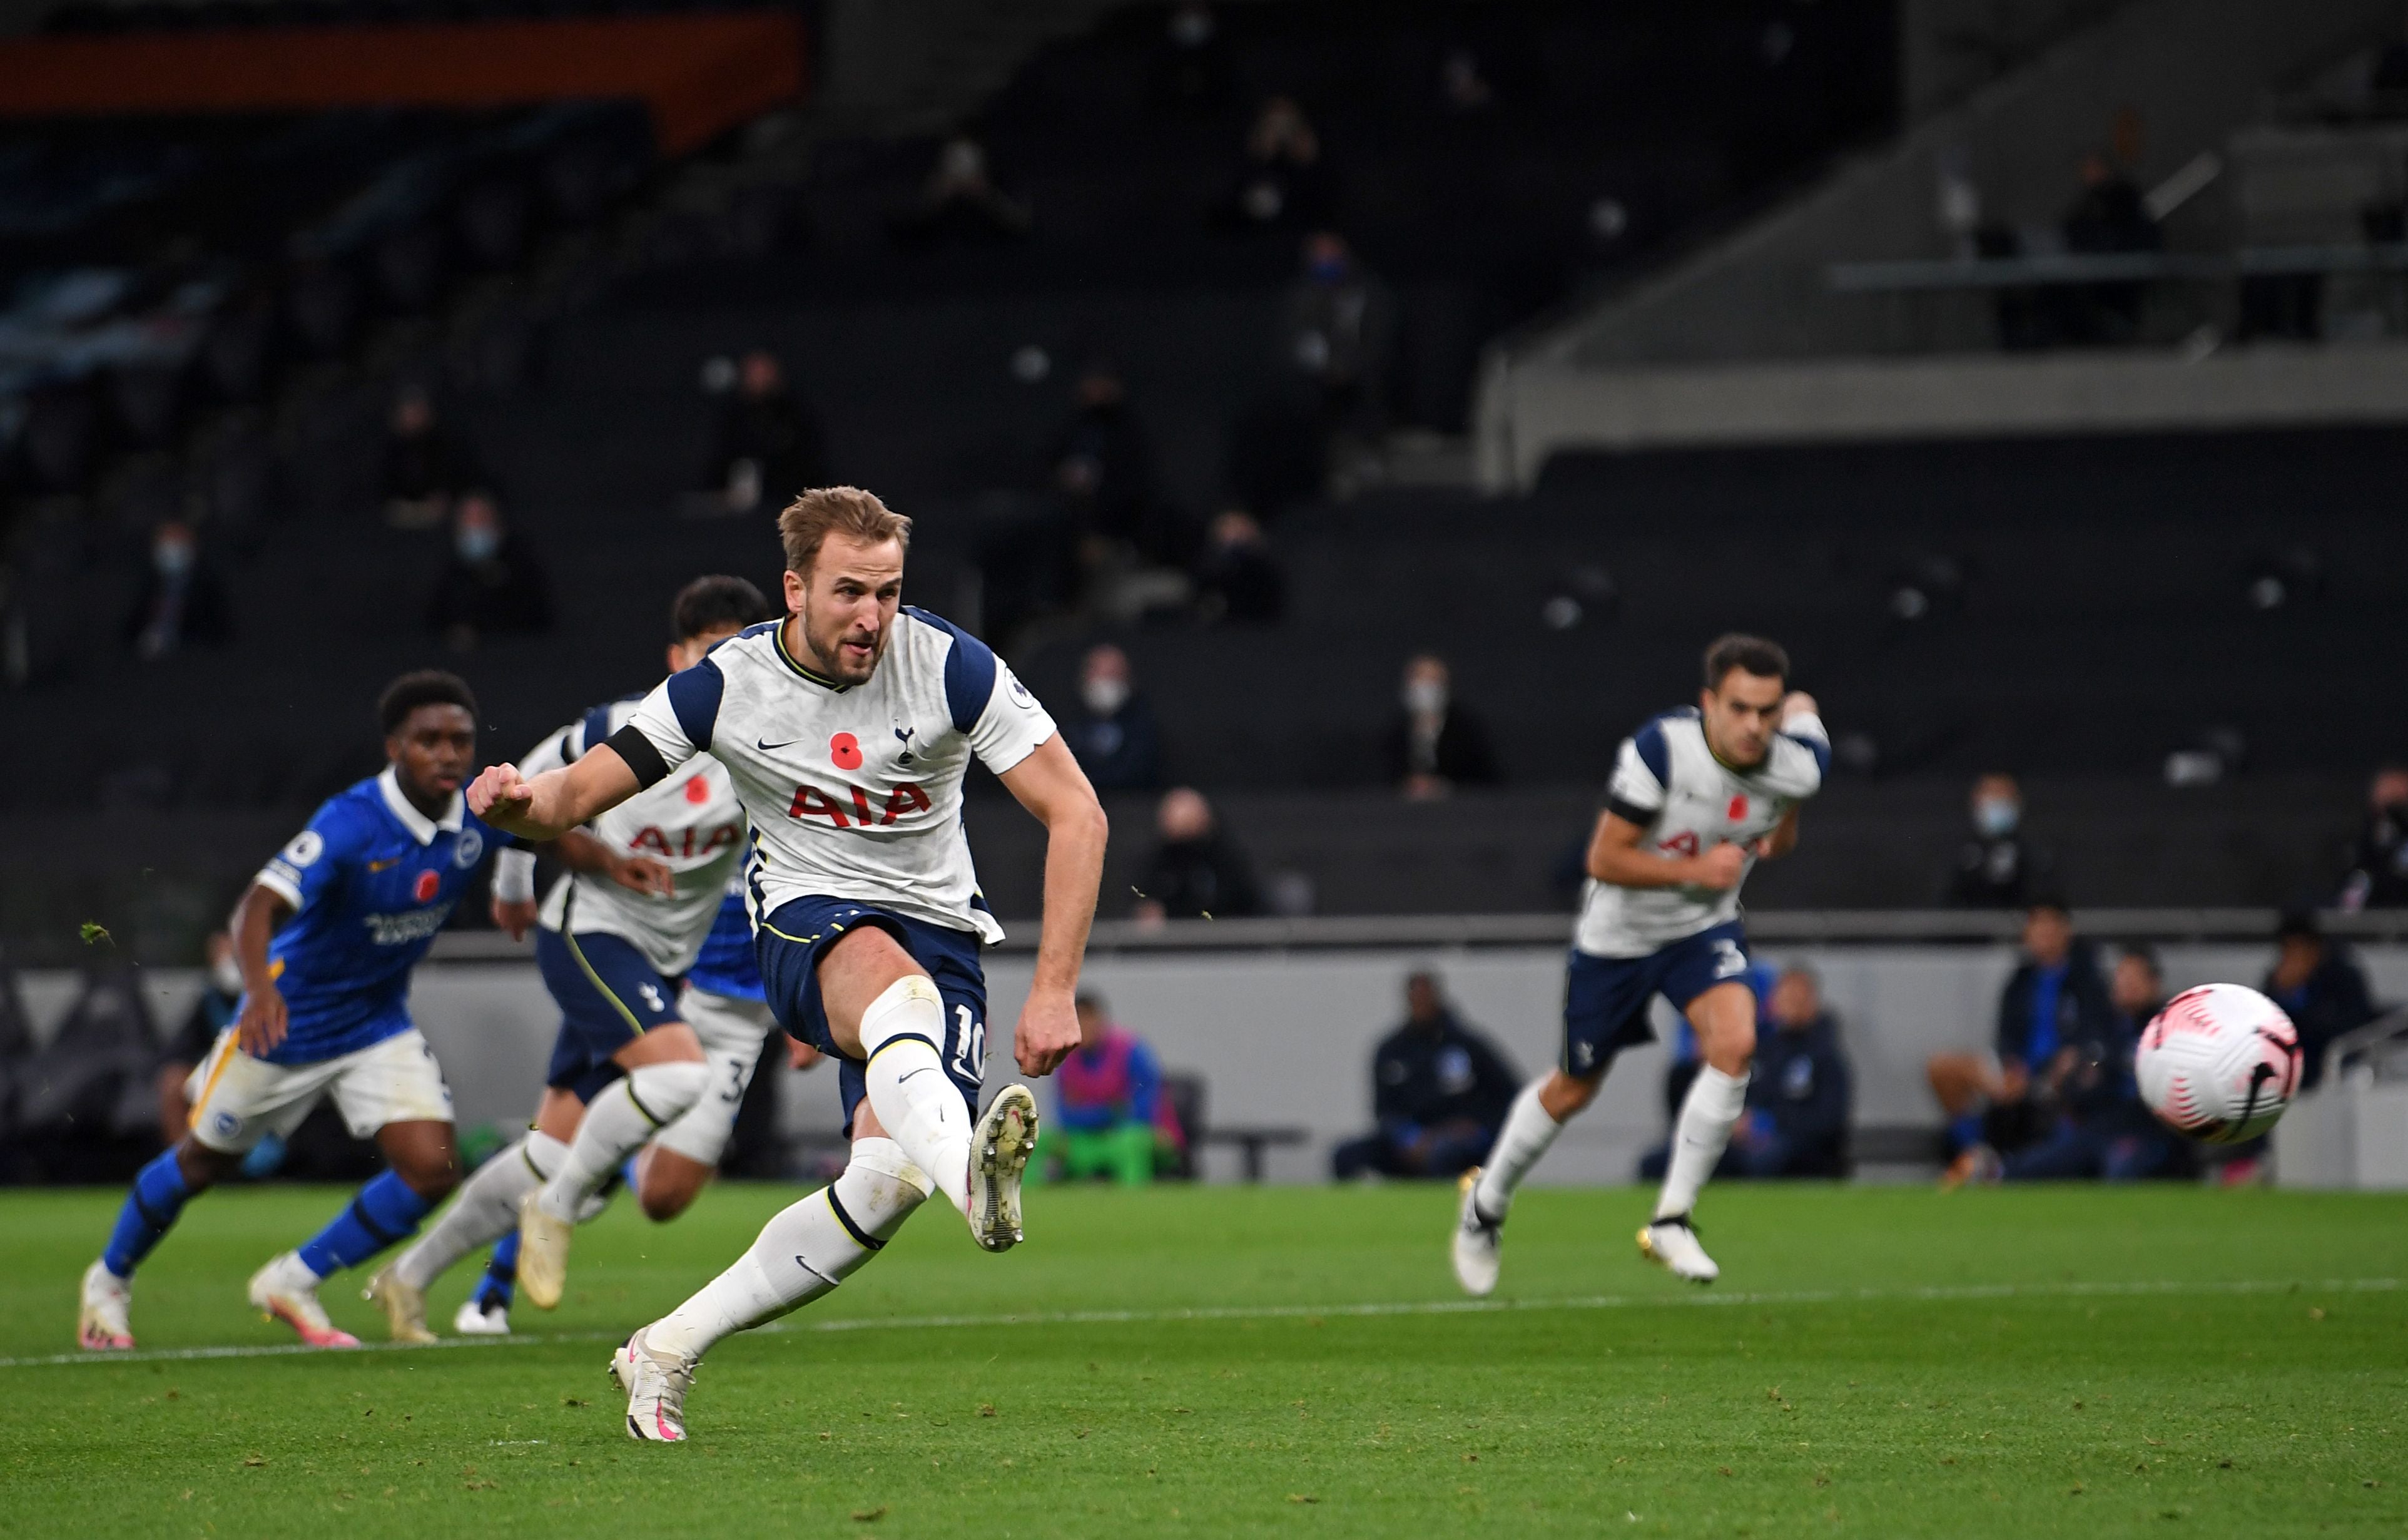 Harry Kane opened the scoring from the penalty spot